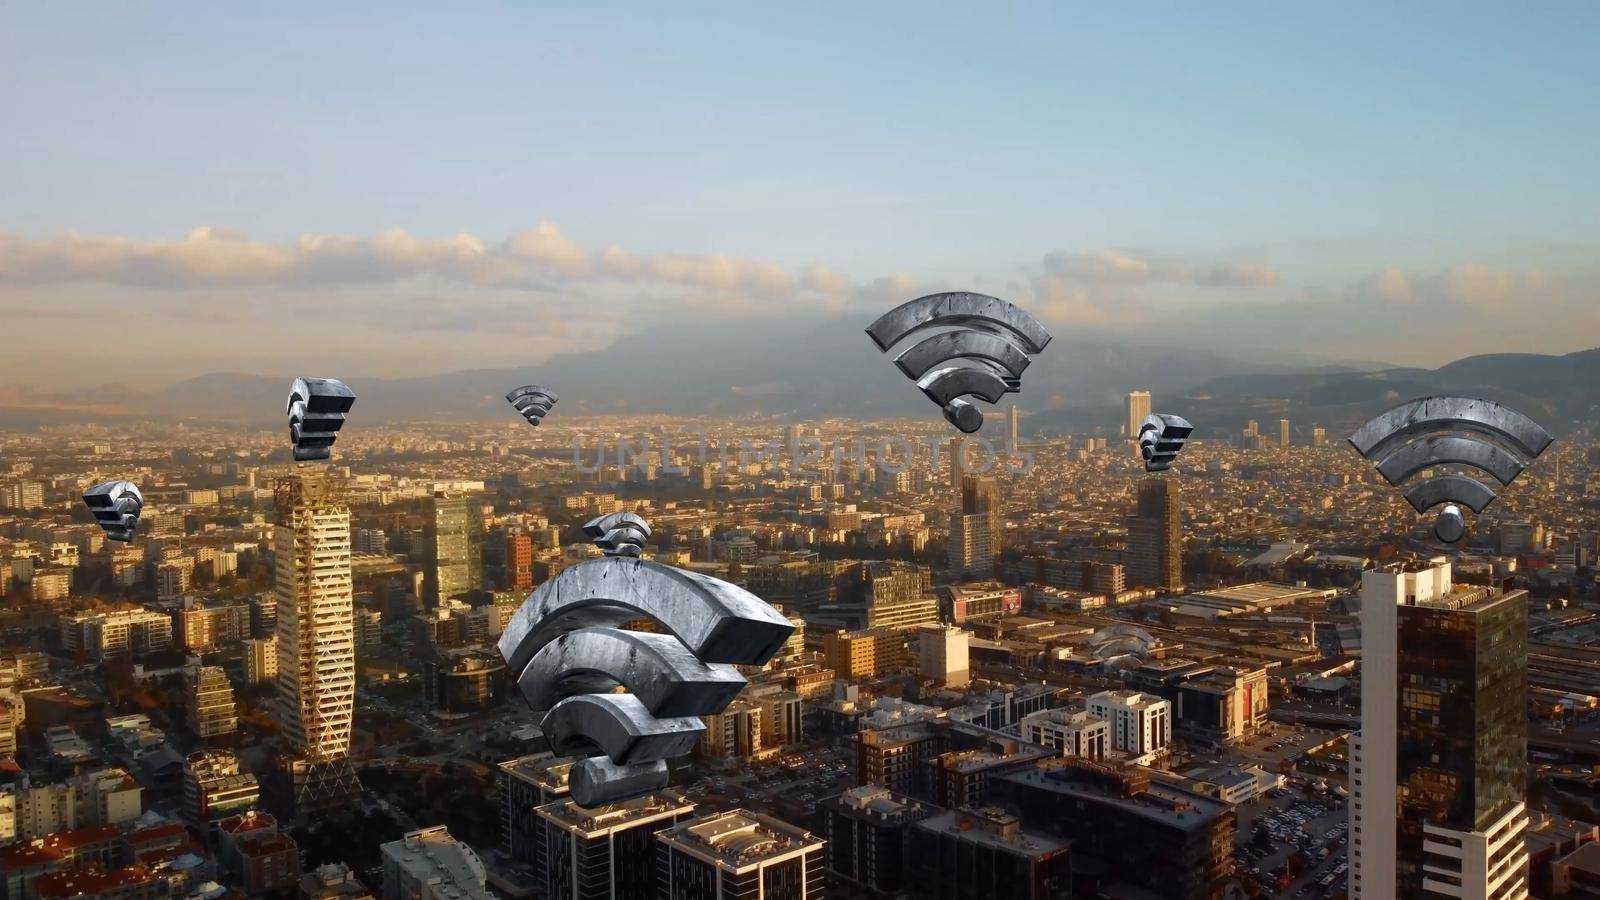 Aerial city connected through 5G. Wireless network, mobile technology concept, data communication, cloud computing, artificial intelligence, internet of things. izmir City skyline. Futuristic city by senkaya